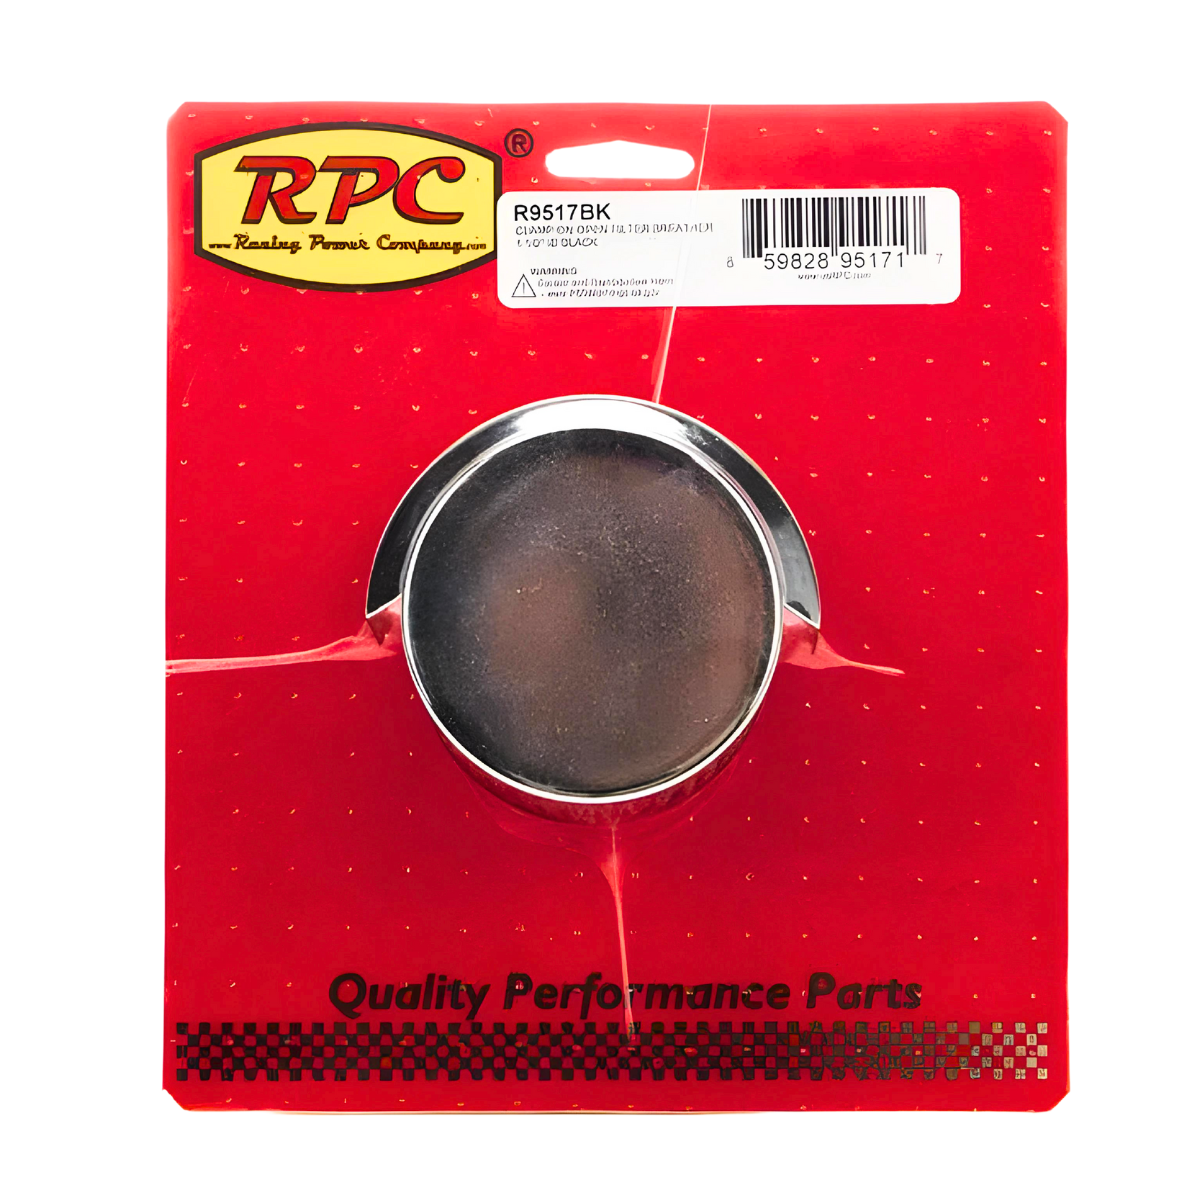 Racing Power Company R9517BK Clamp On Open Filter Breather 1 1/2 inch Id Black